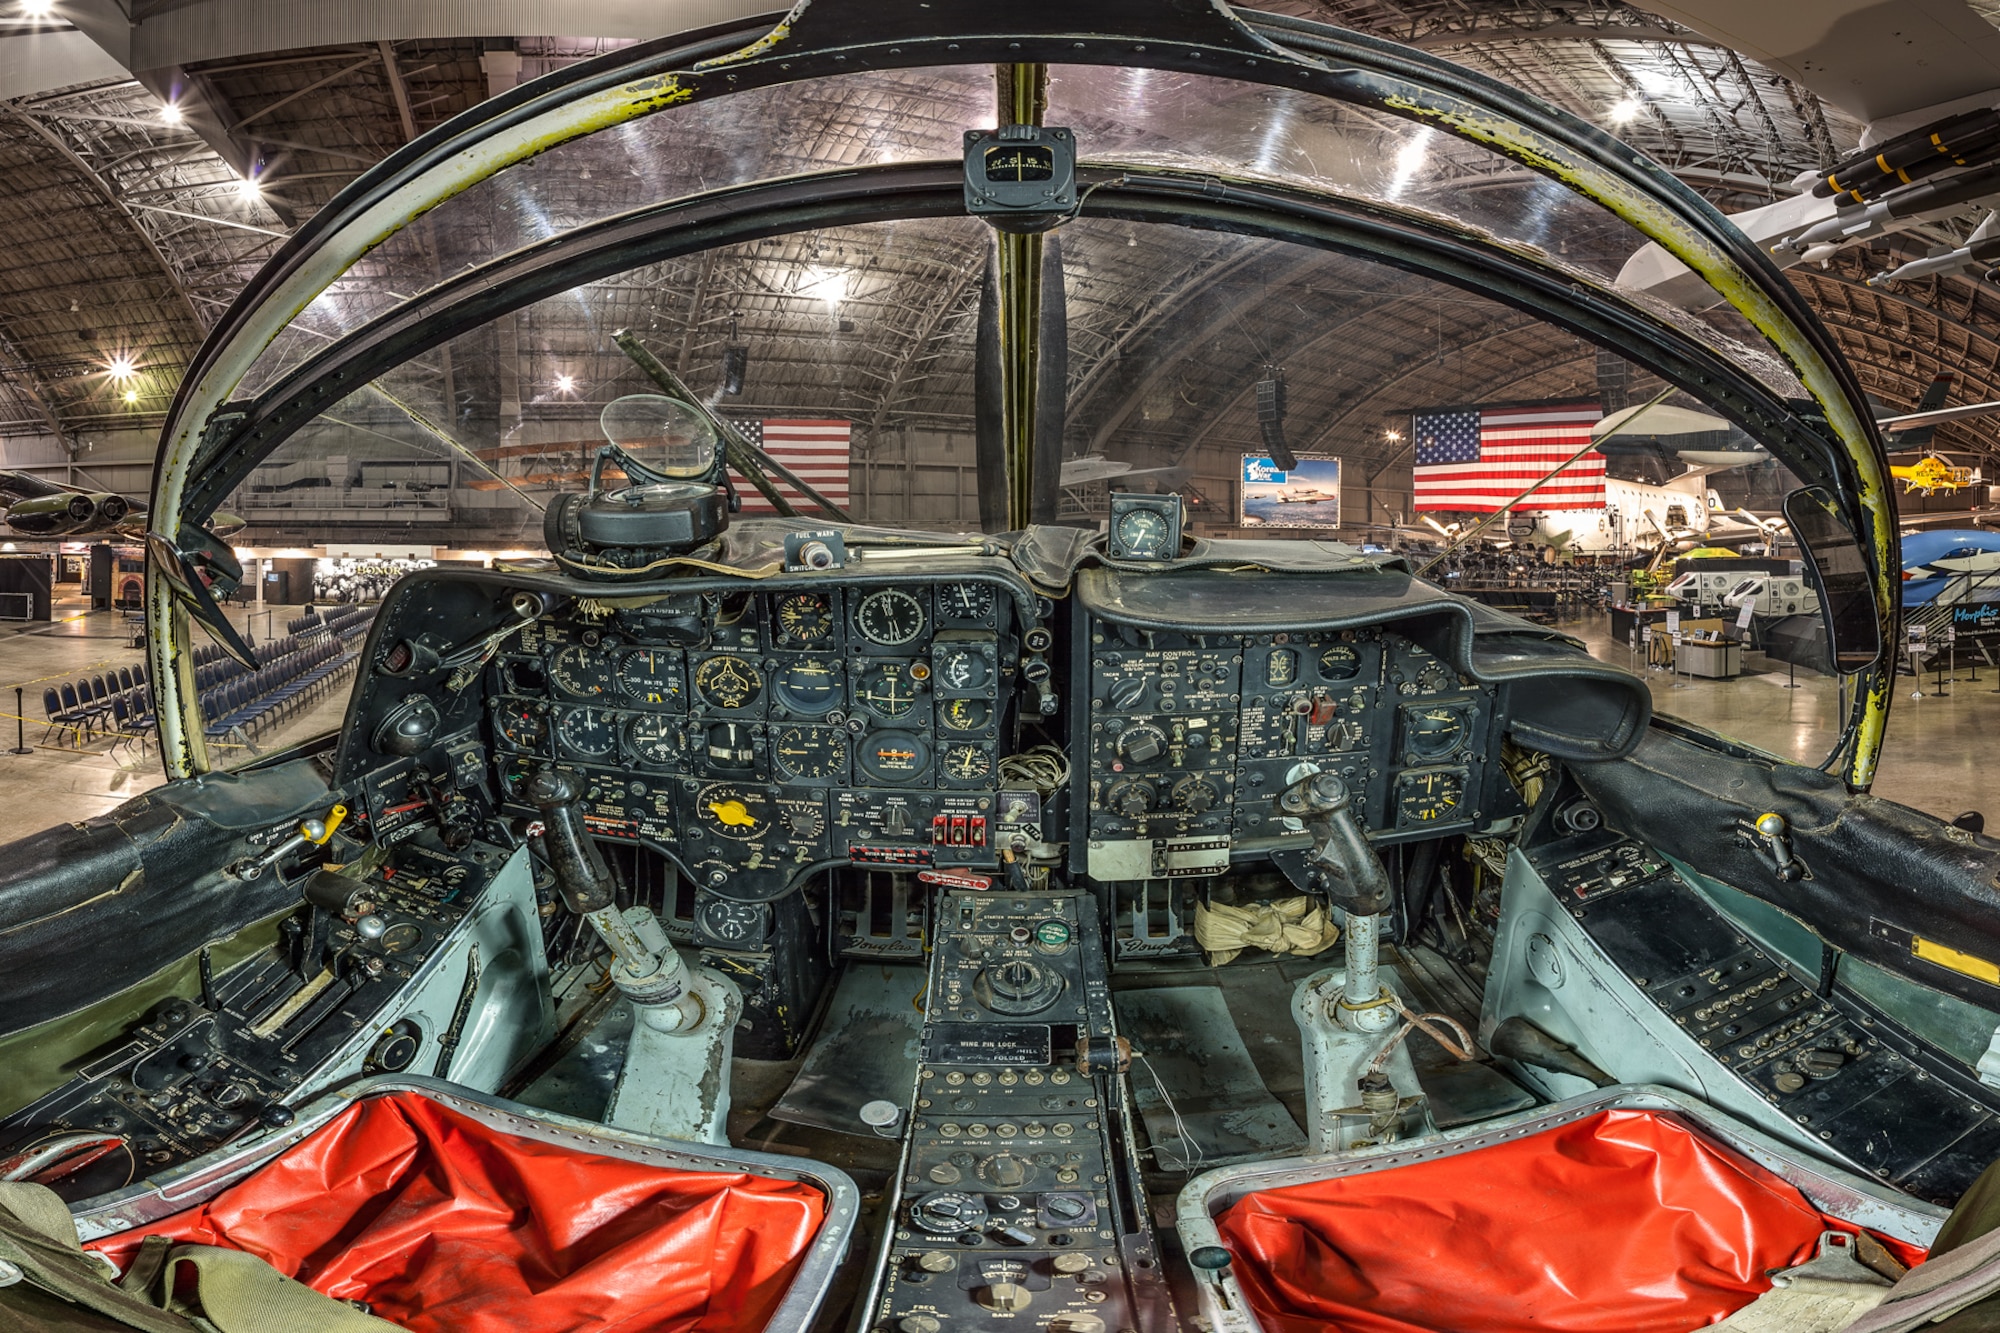 AIDS Besluit teller Douglas A-1E Skyraider > National Museum of the United States Air Force™ >  Display